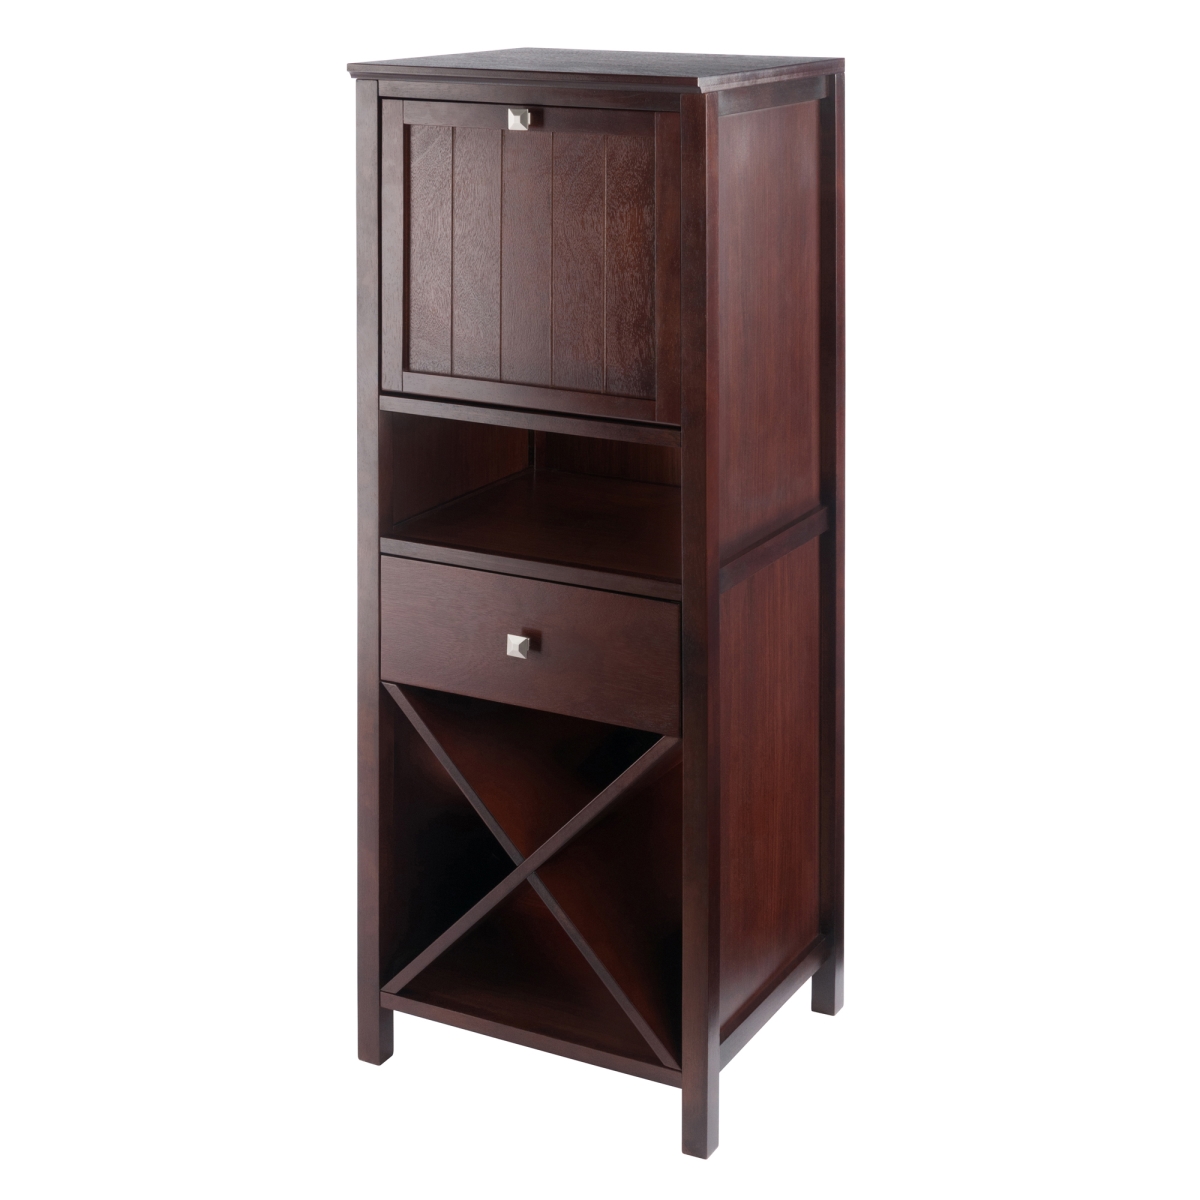 94443 17.3 X 15.7 X 47.4 In. Brooke Jelly Cupboard With 4-section Cabinet, Walnut